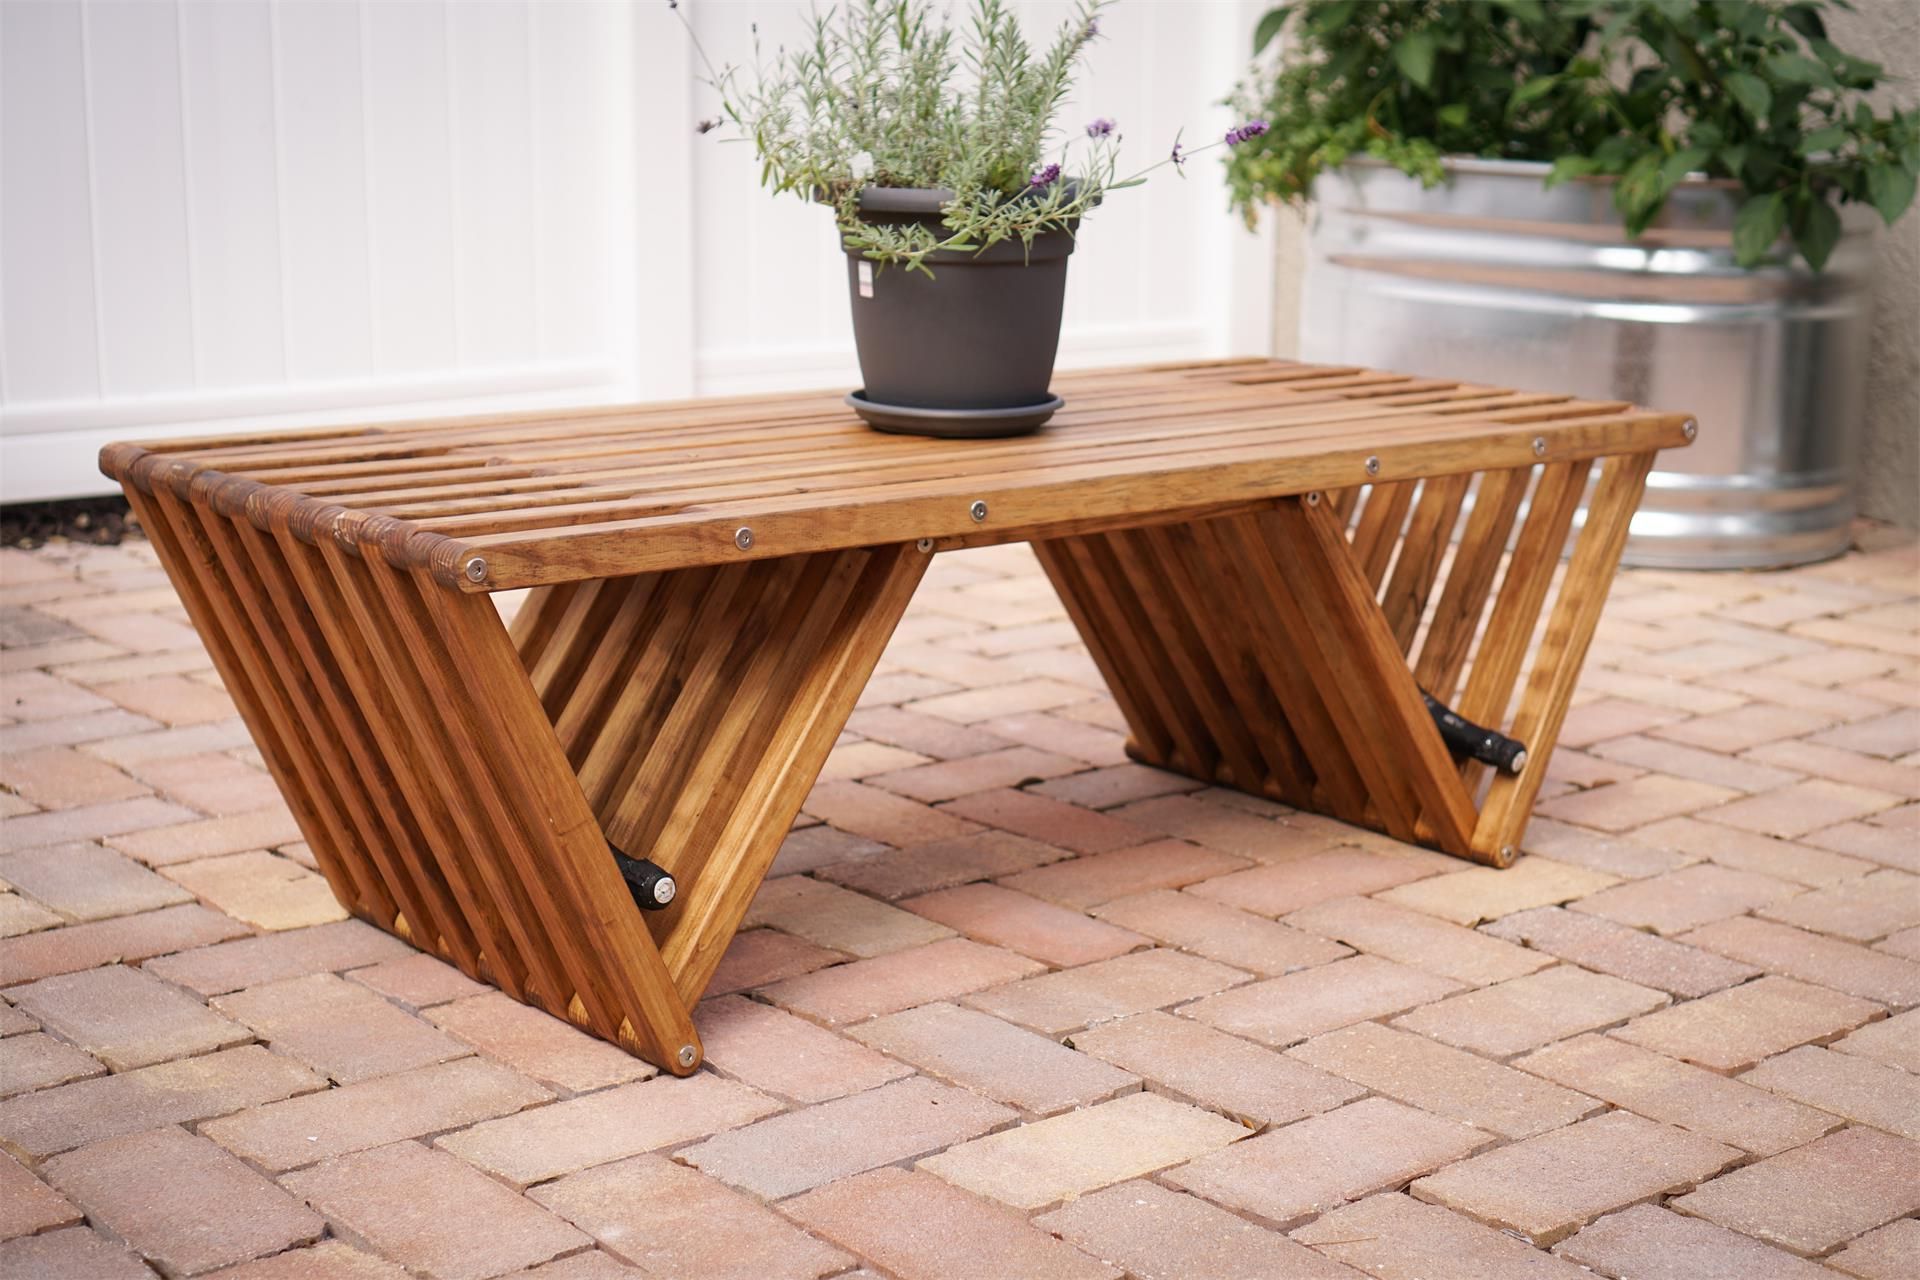 Preferred Wood Coffee Tables For X36 Pine Wood Coffee Table From Eco Friendly Digs (View 11 of 20)